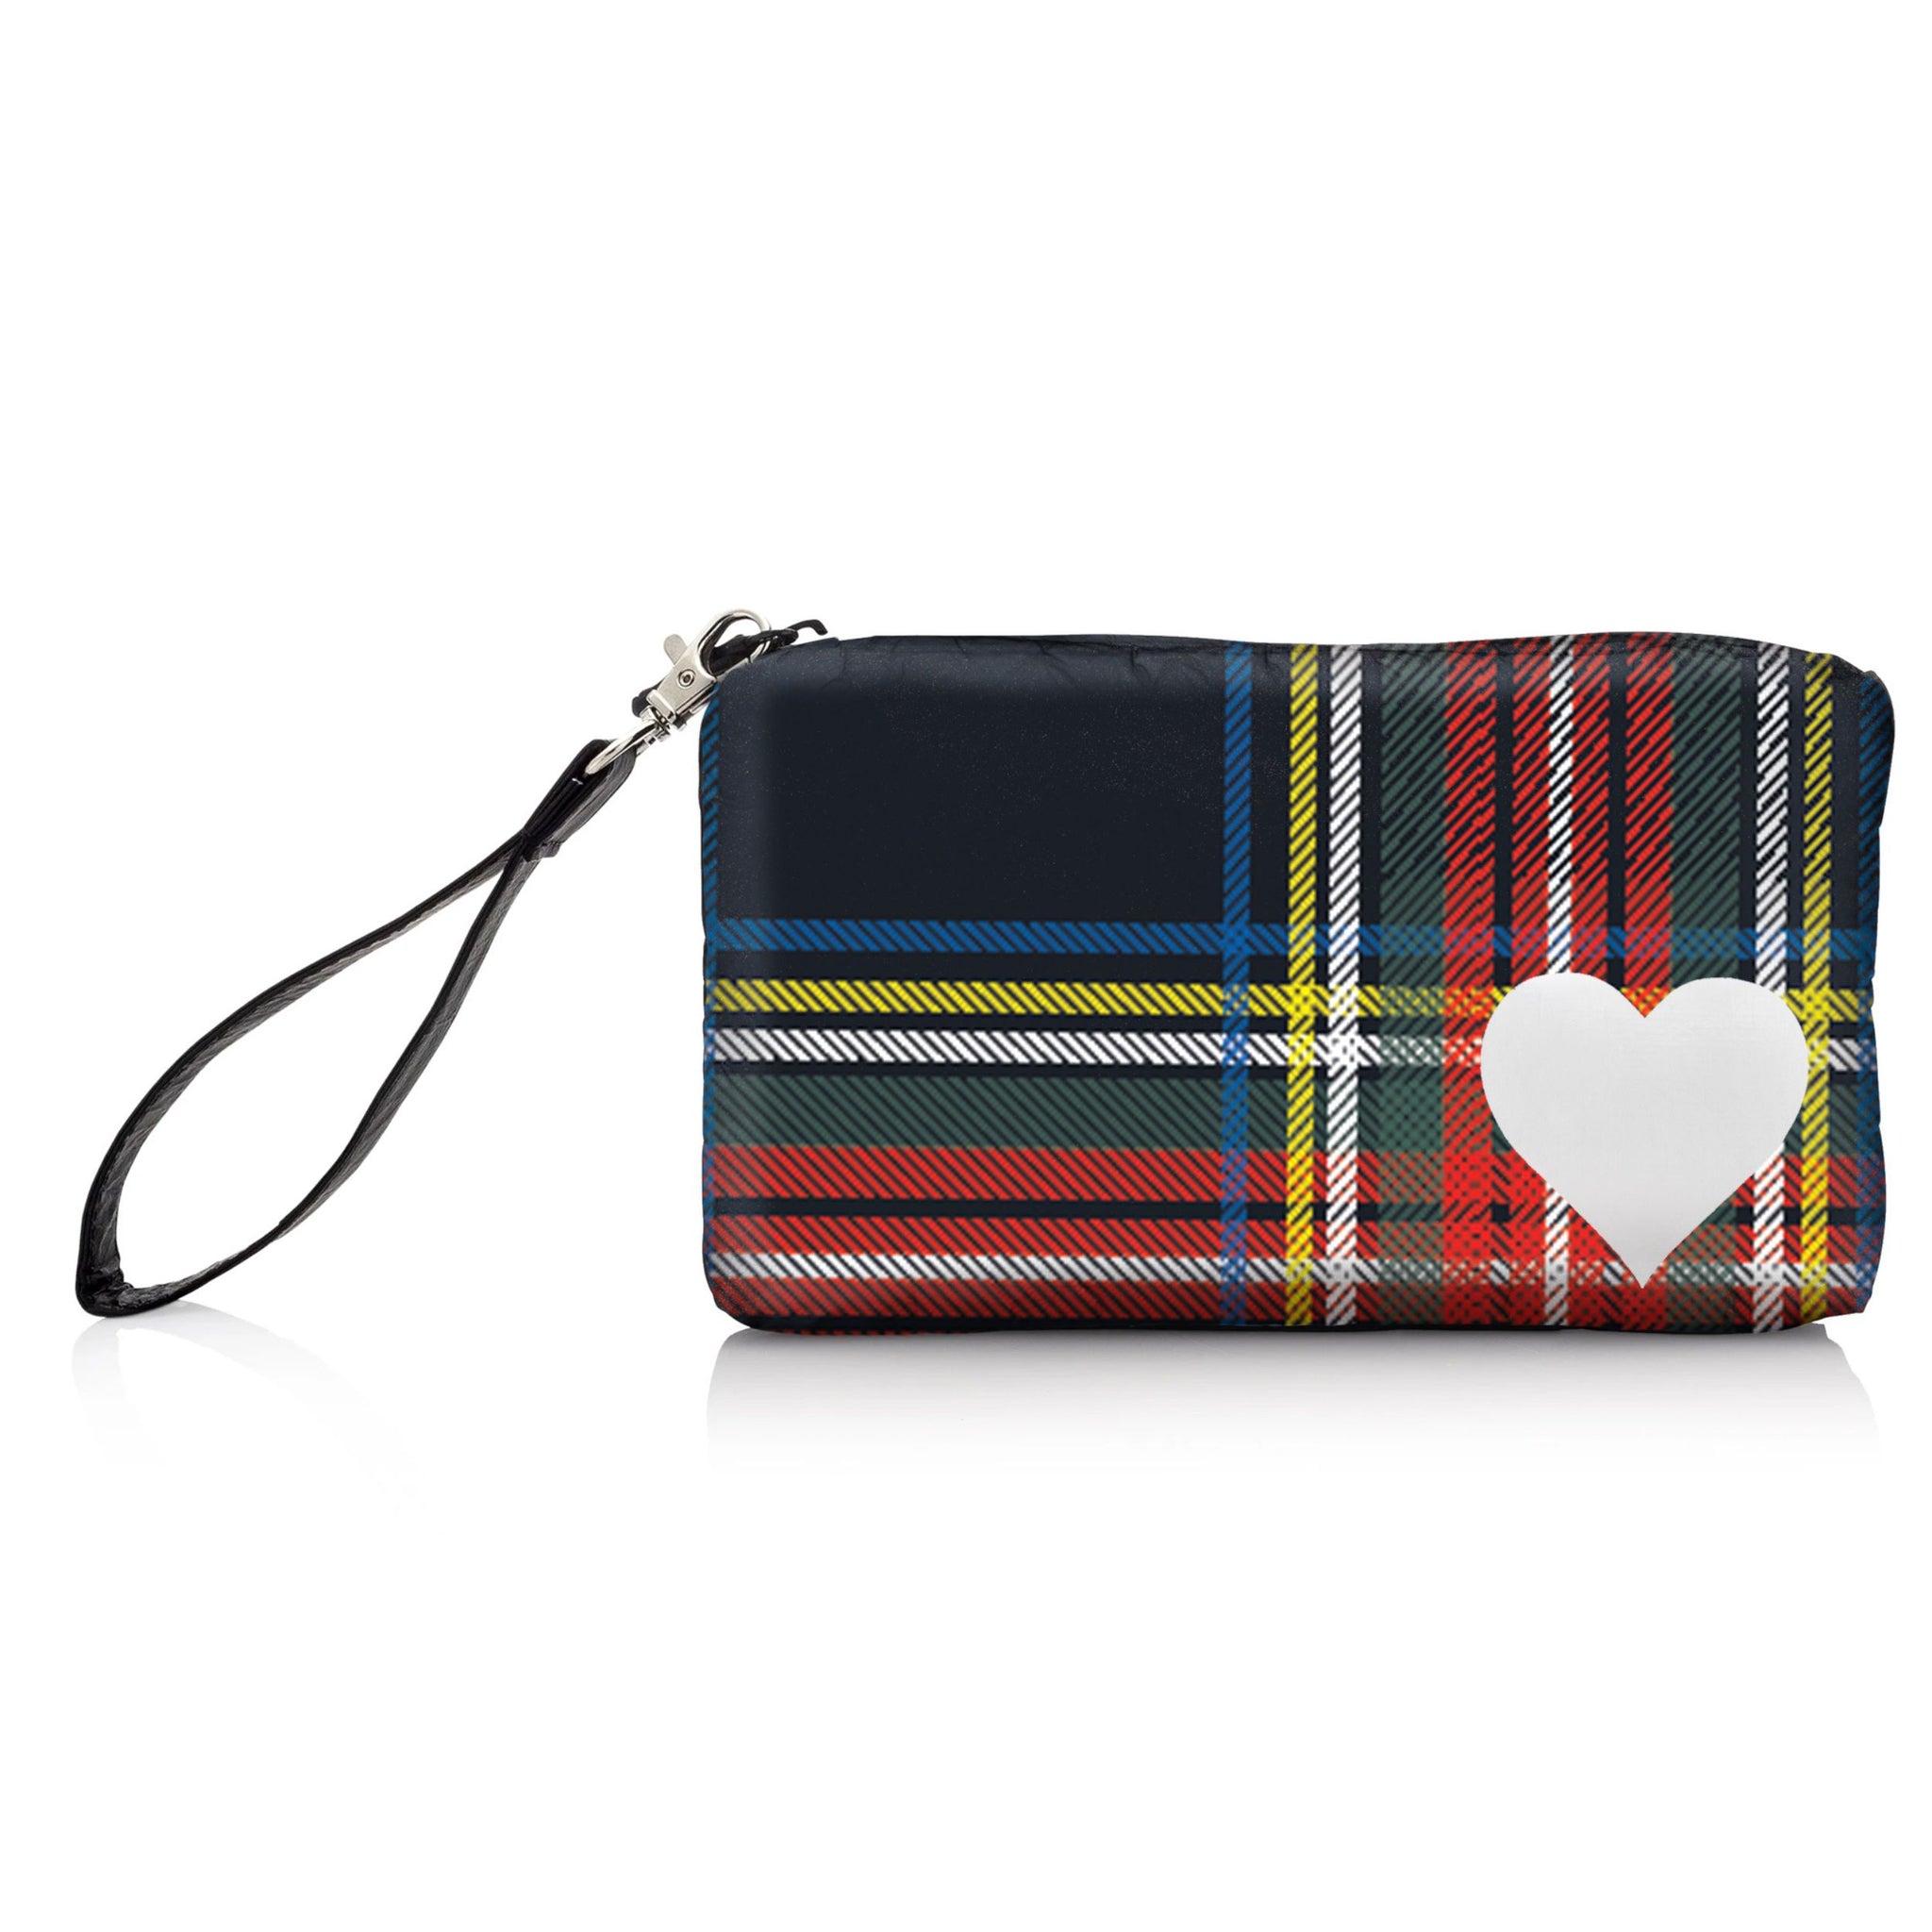 Zip wristlet in holiday plaid with a white heart